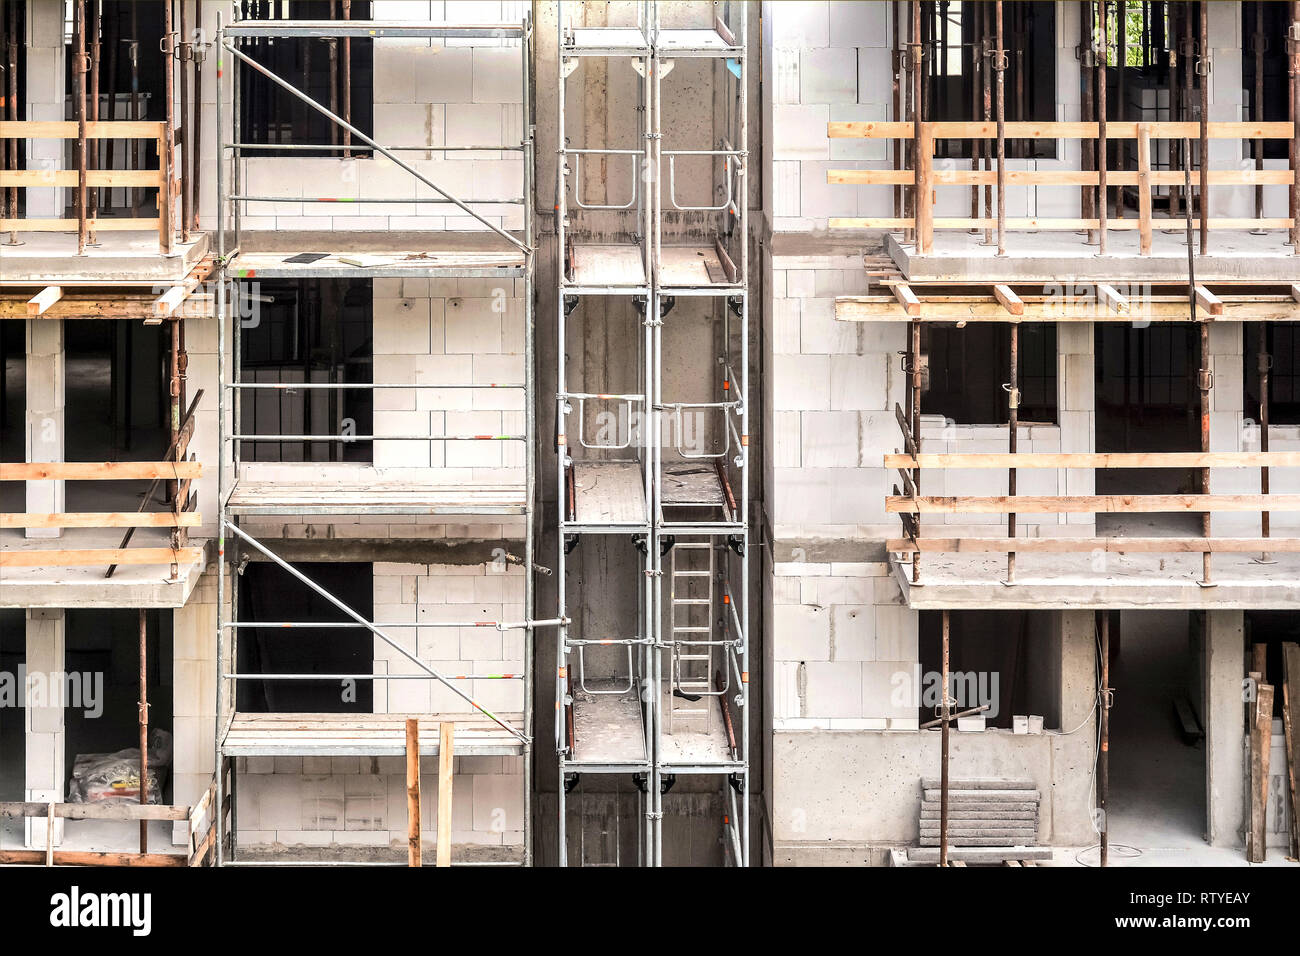 Apartment building construction site with scaffolding Stock Photo